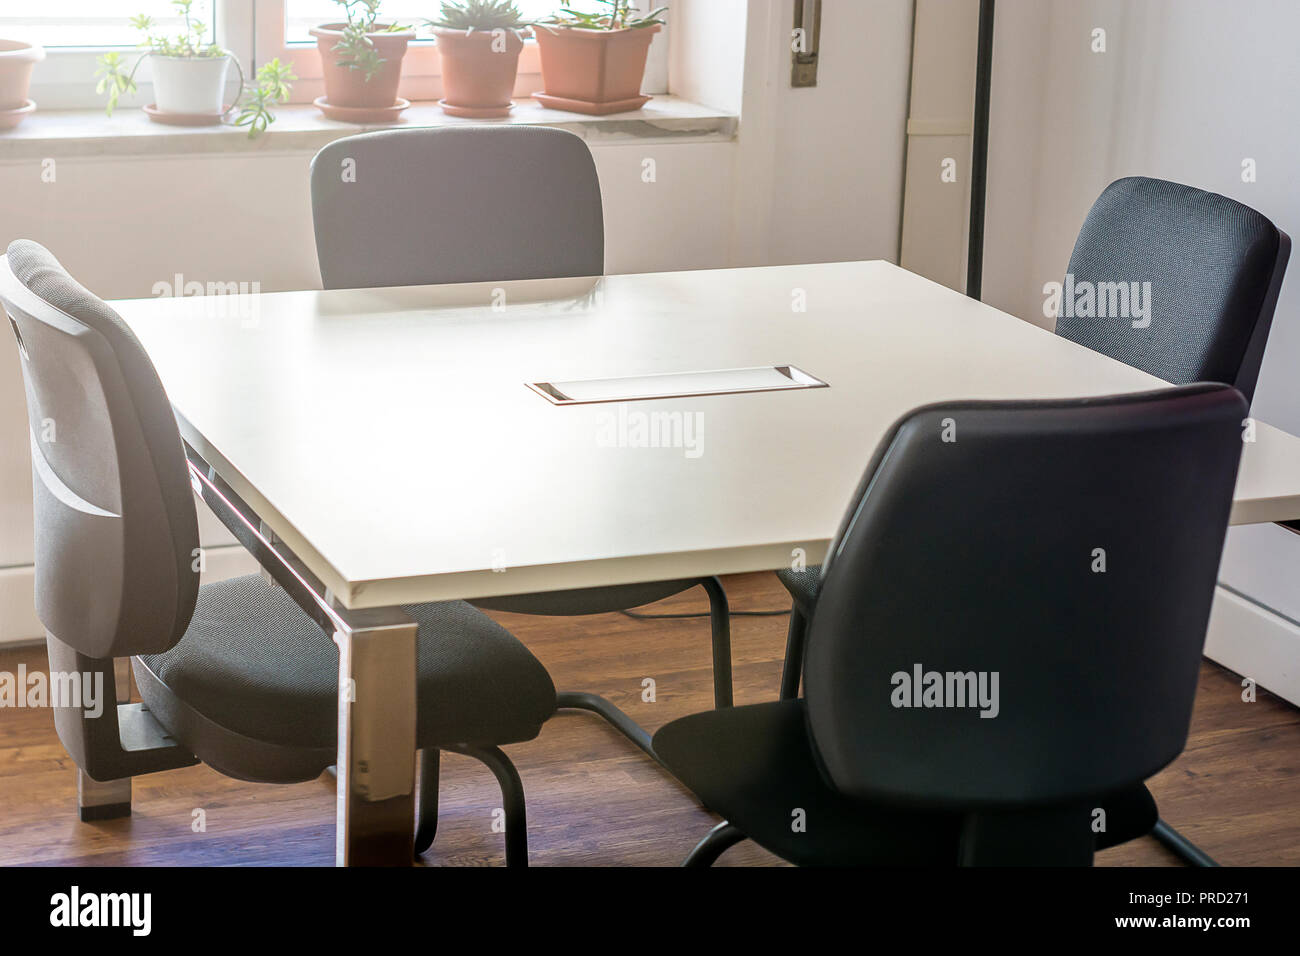 four empty chairs in a conference room with a white table Stock Photo